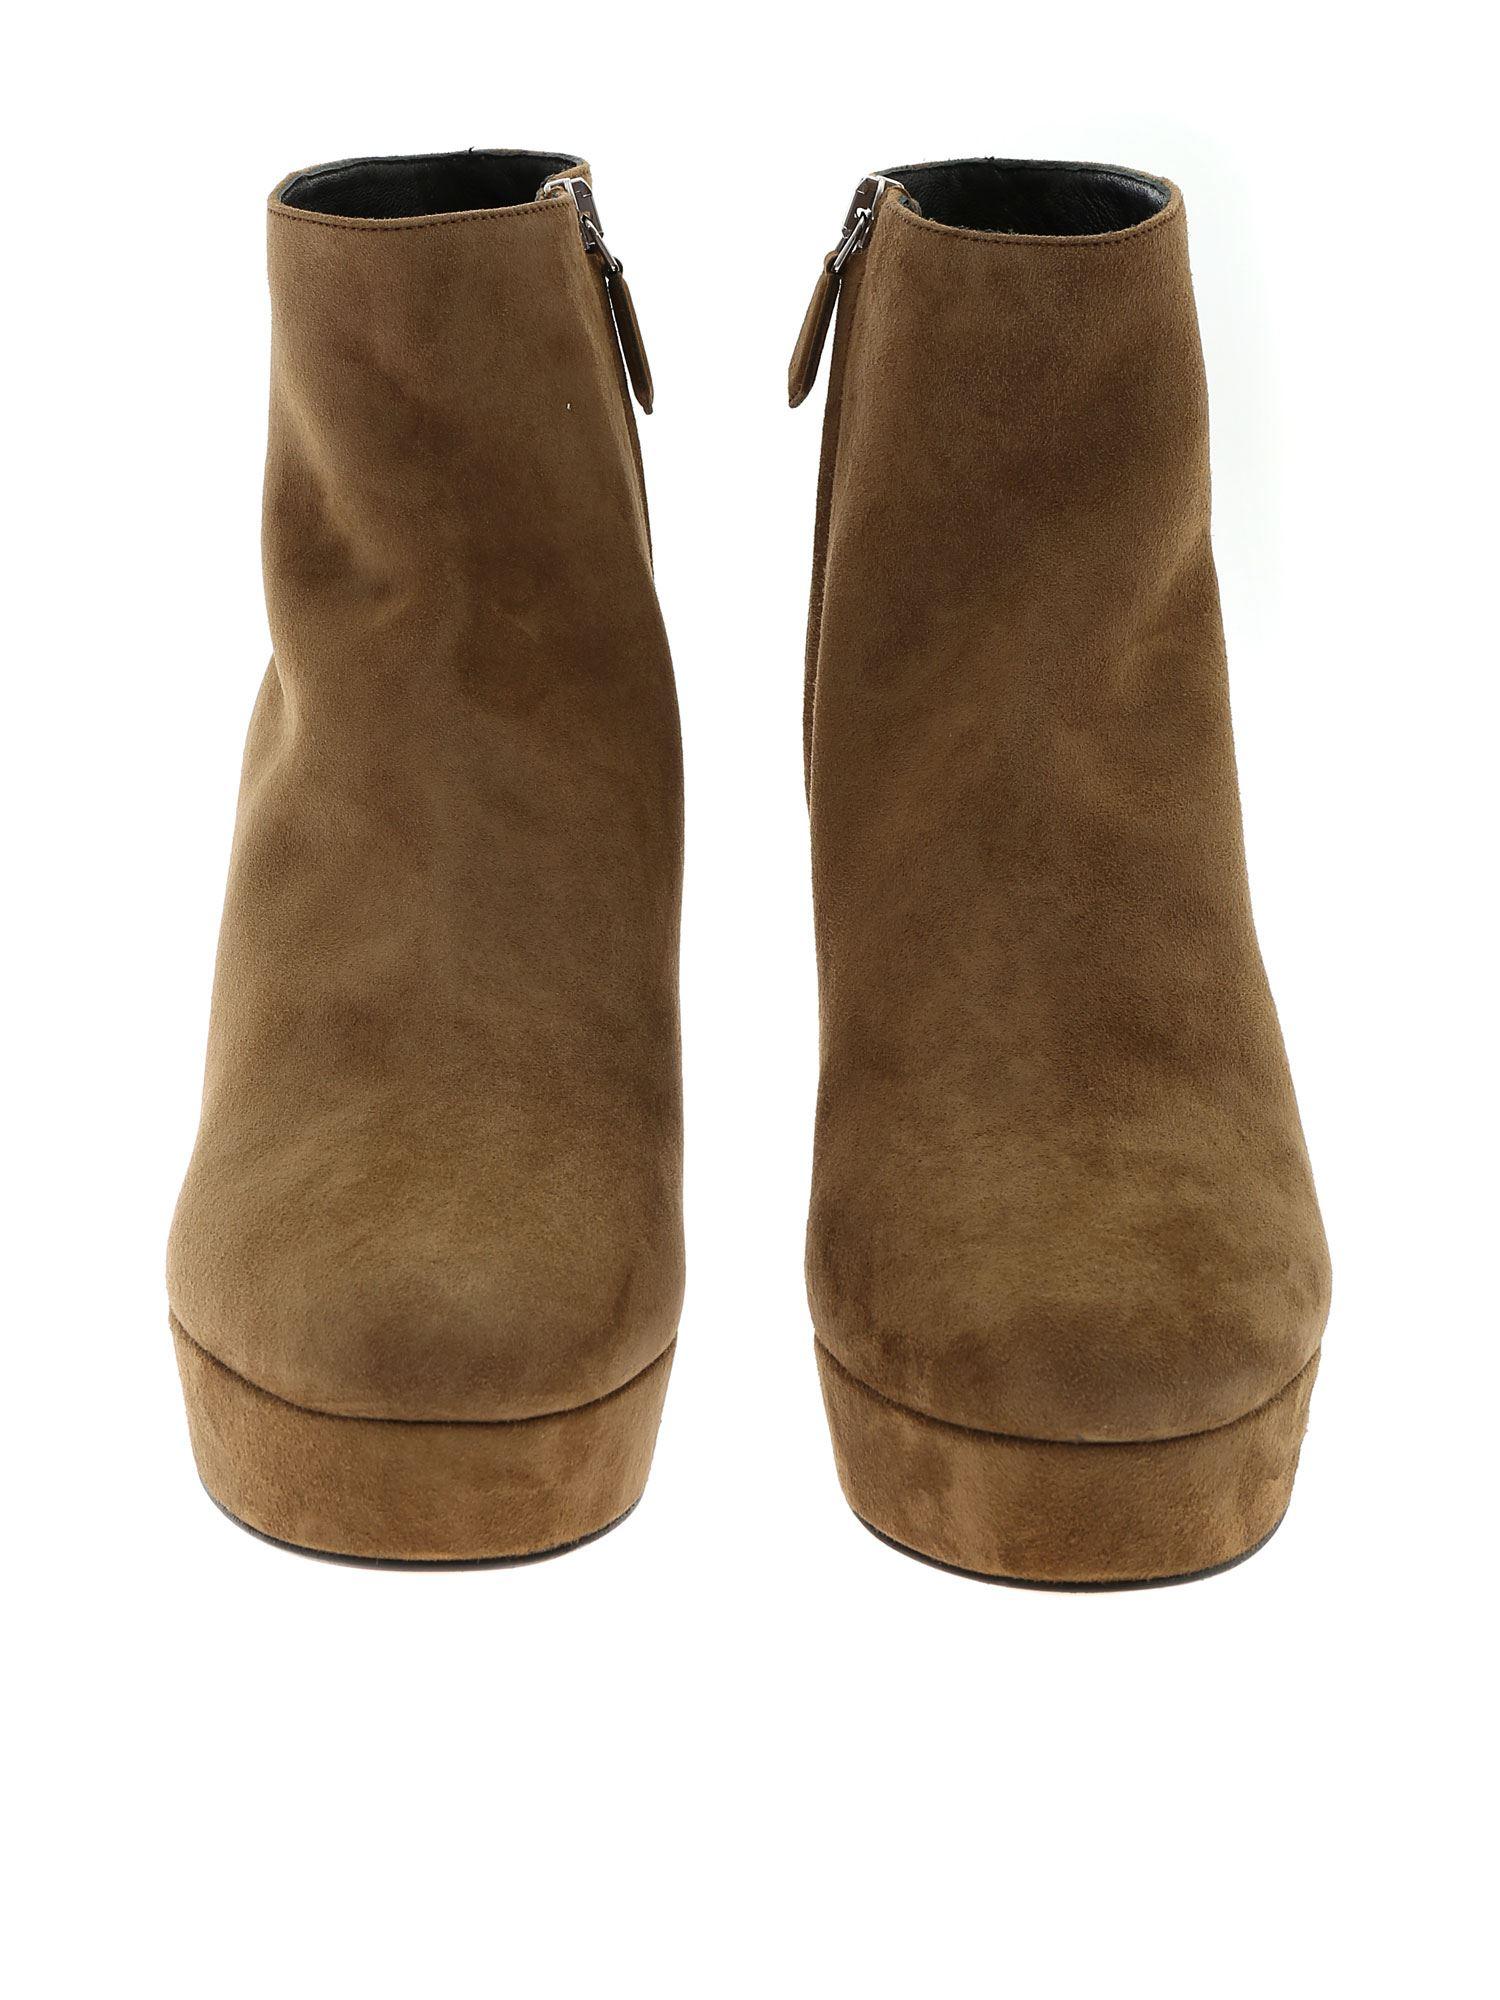 Prada Ankle Boots In Beige Suede Leather in Natural - Lyst